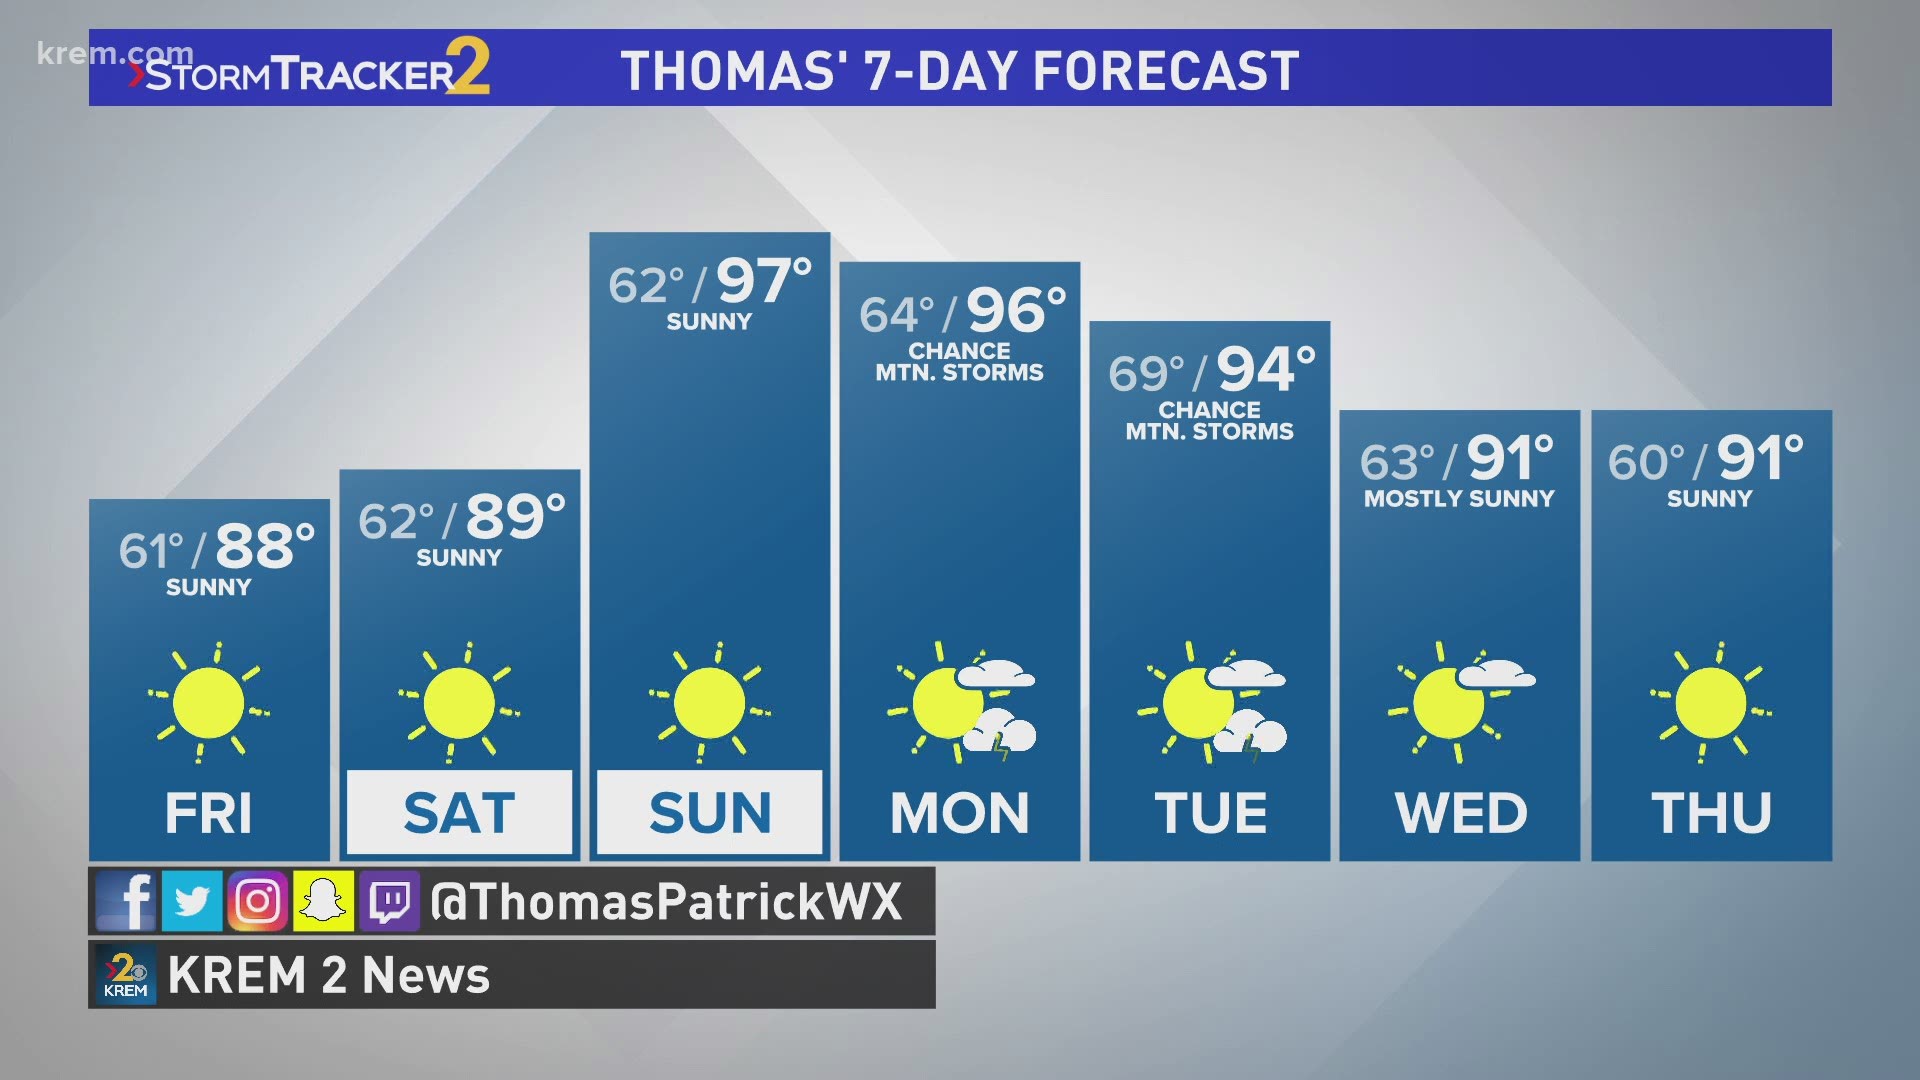 KREM's Thomas Patrick has the weekday forecast for the Inland Northwest on July 15, 2021 at 11 p.m.